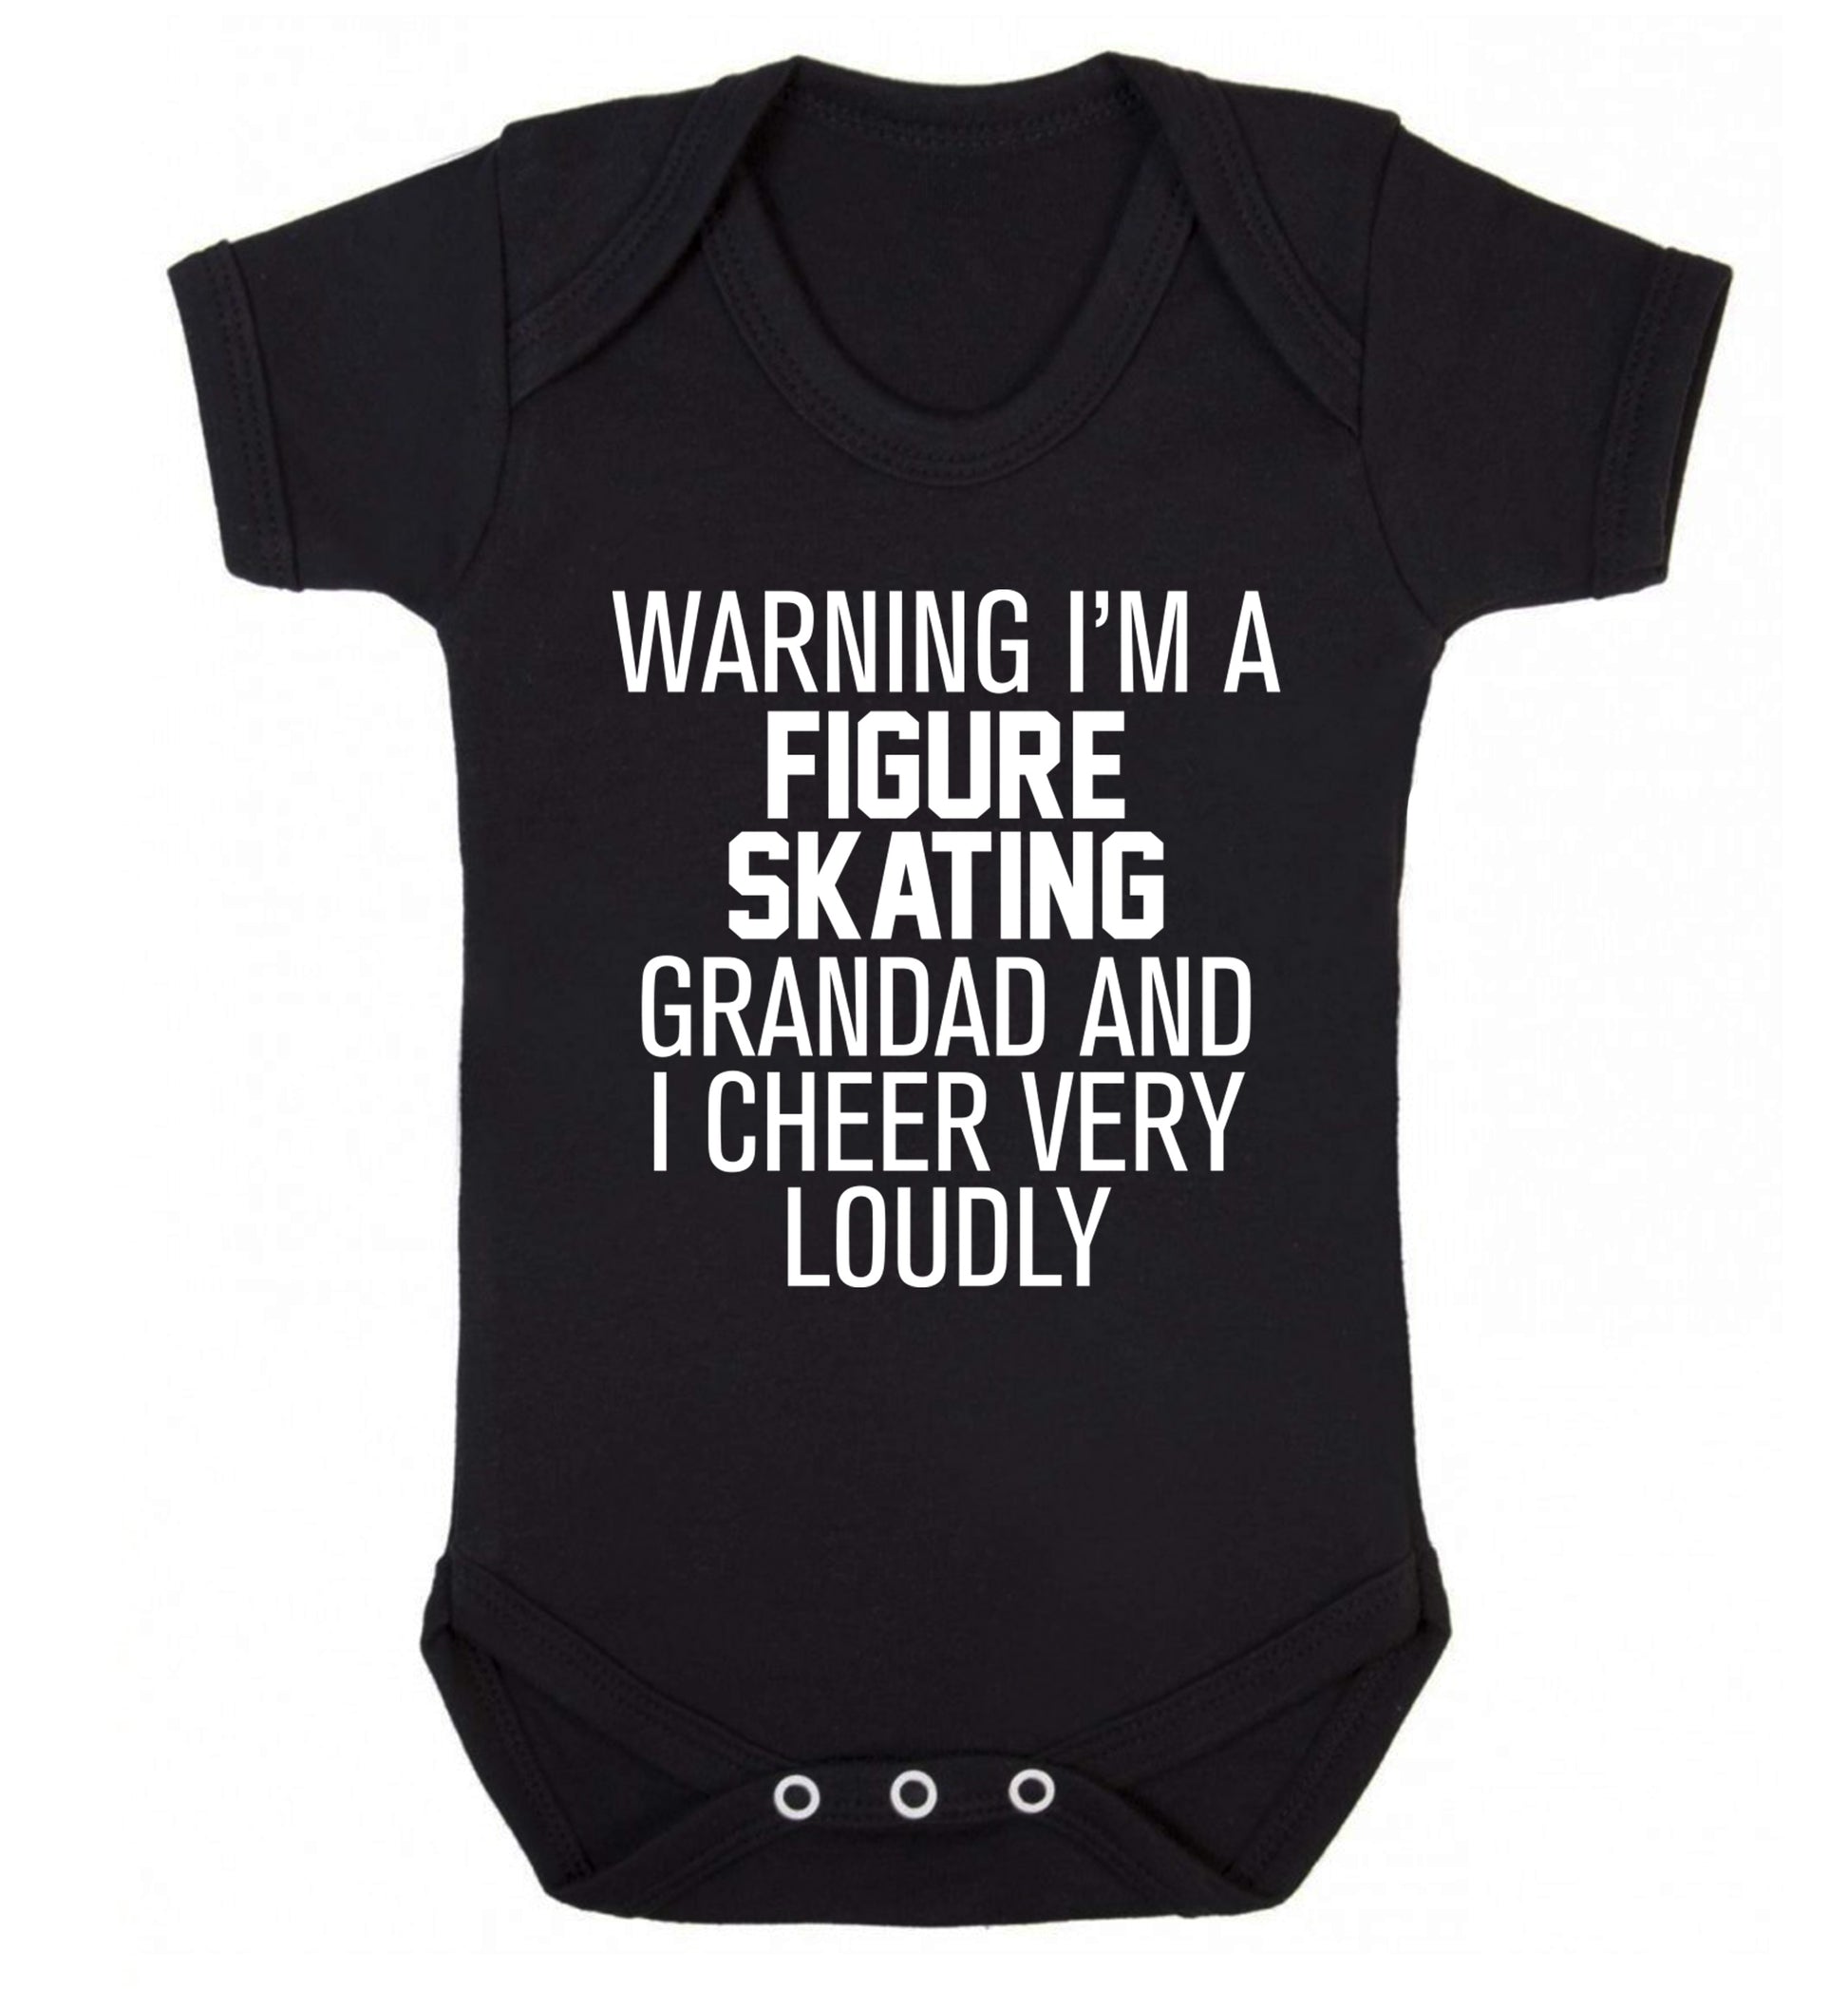 Warning I'm a figure skating grandad and I cheer very loudly Baby Vest black 18-24 months